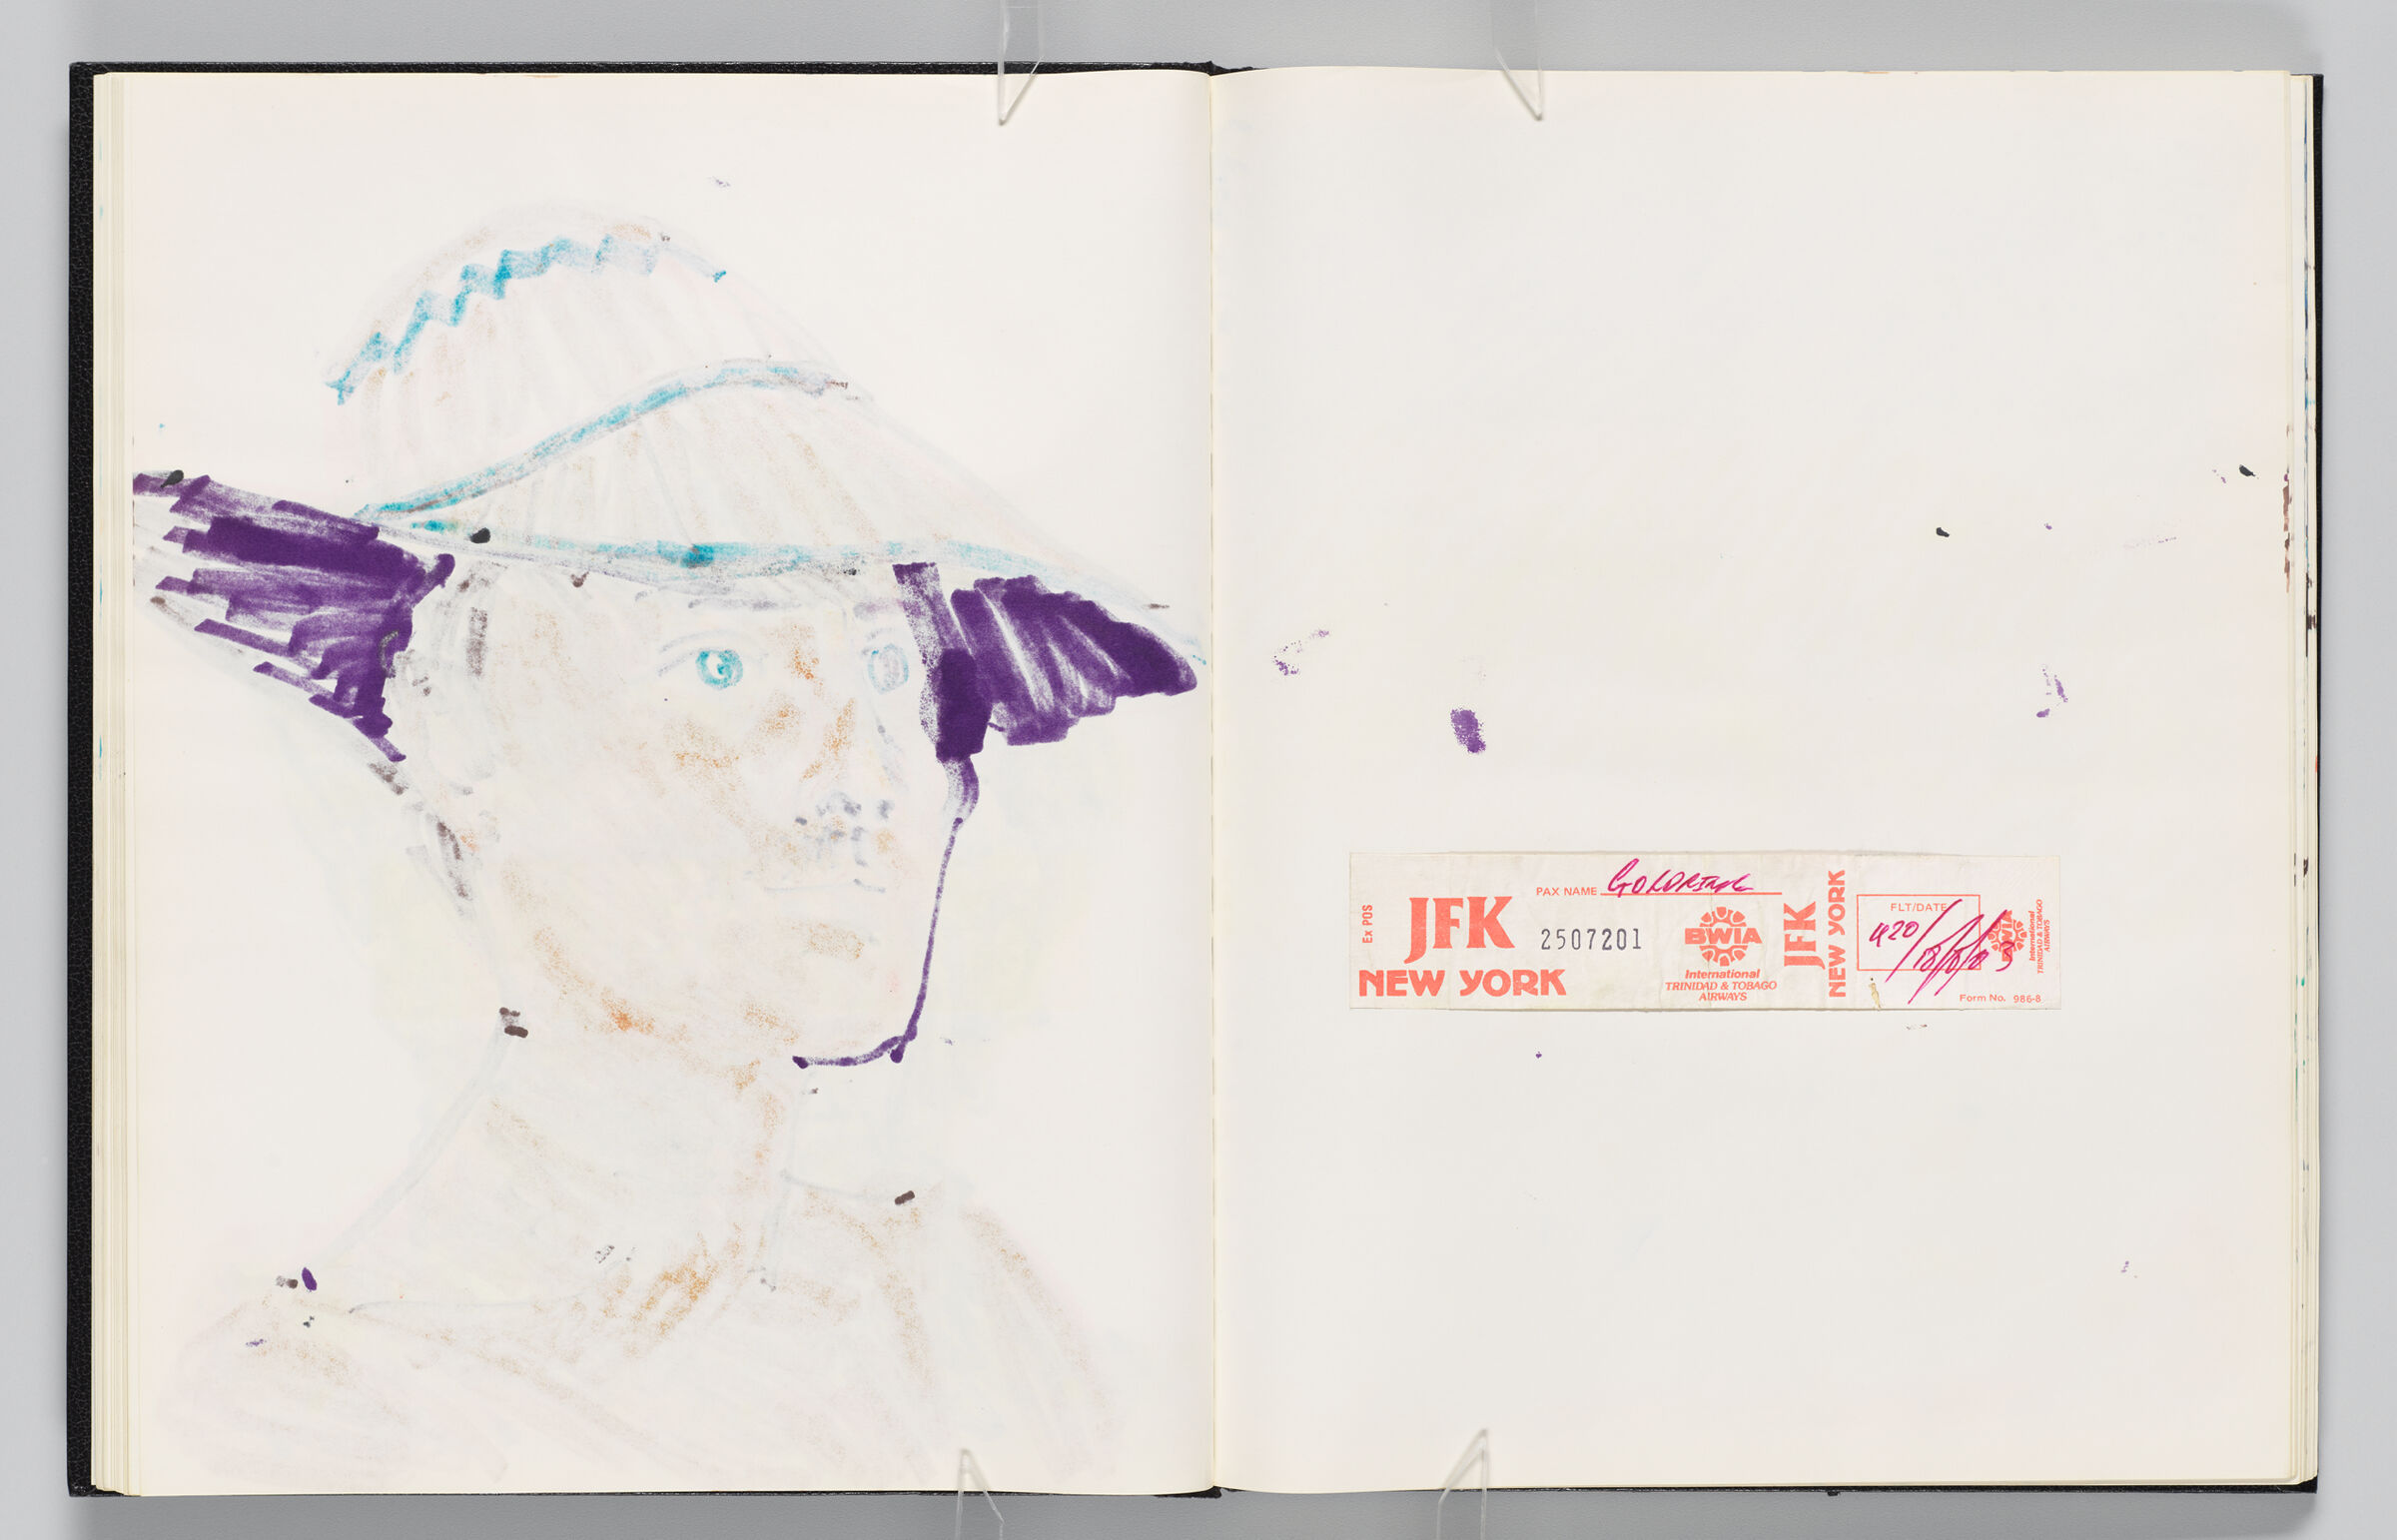 Untitled (Bleed-Through Of Previous Page, Left Page); Untitled (Luggage Tag, Right Page)